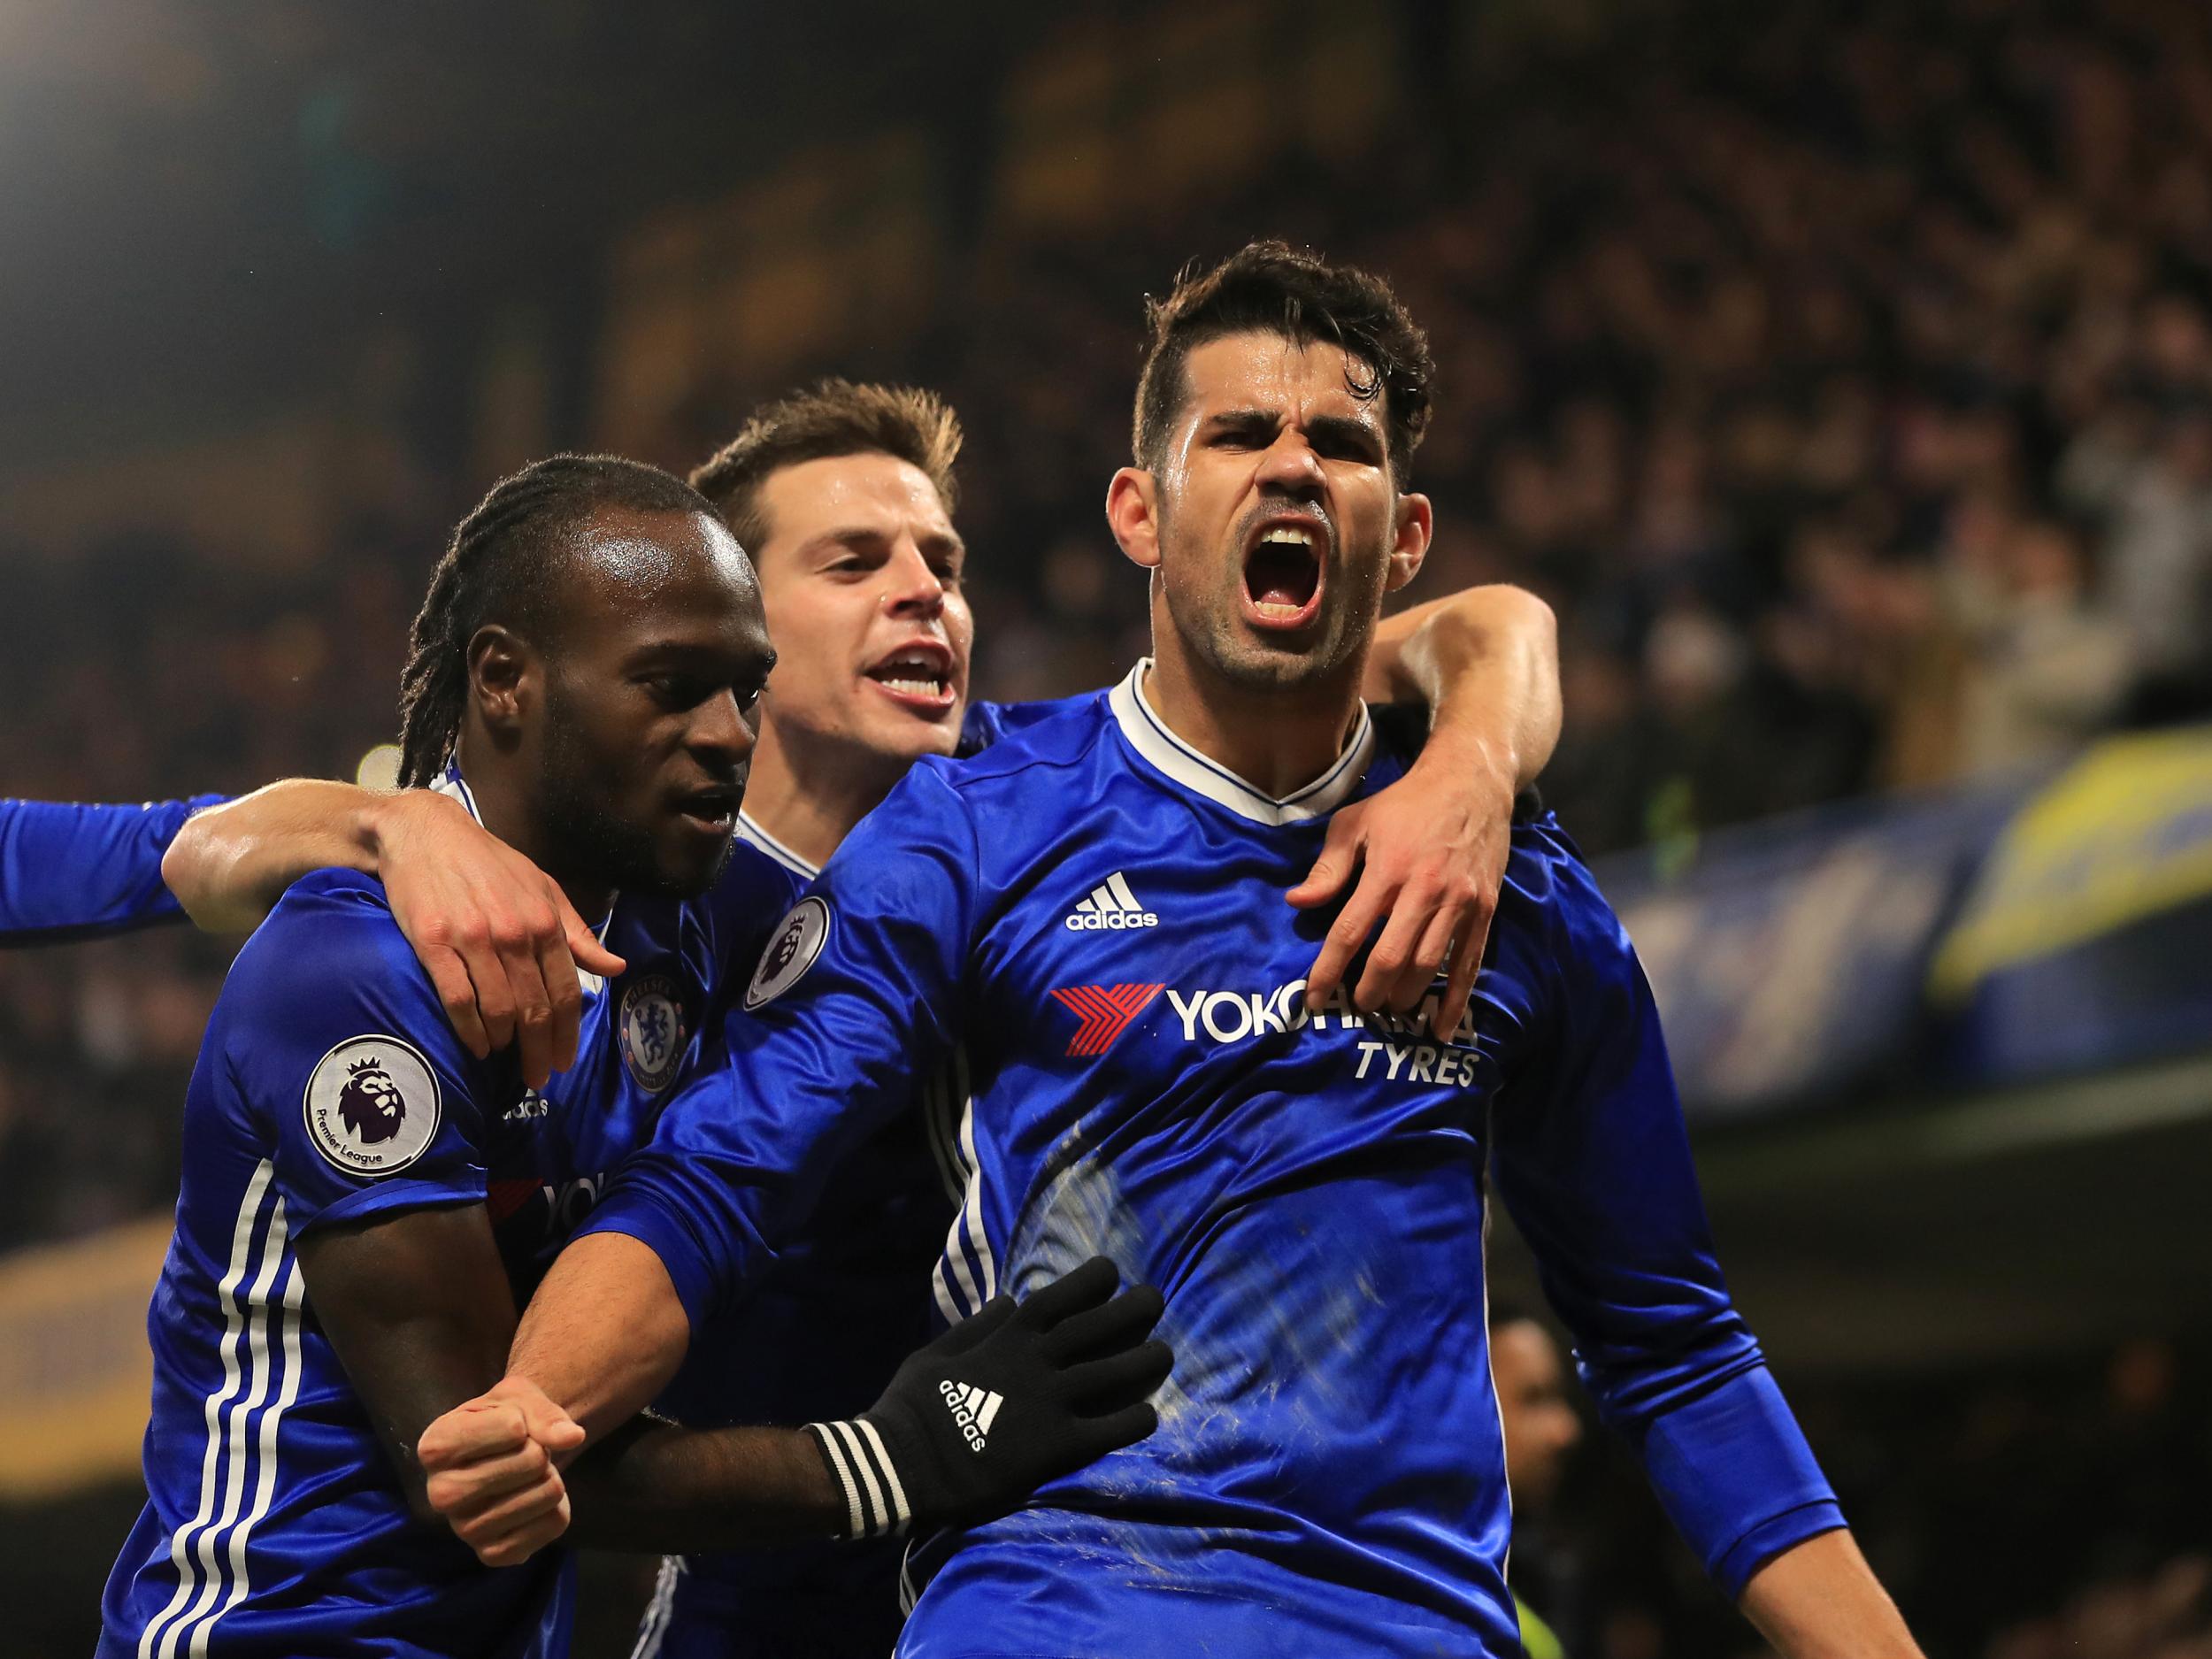 Diego Costa was key to their title win, as was Conte's treatment of him in January